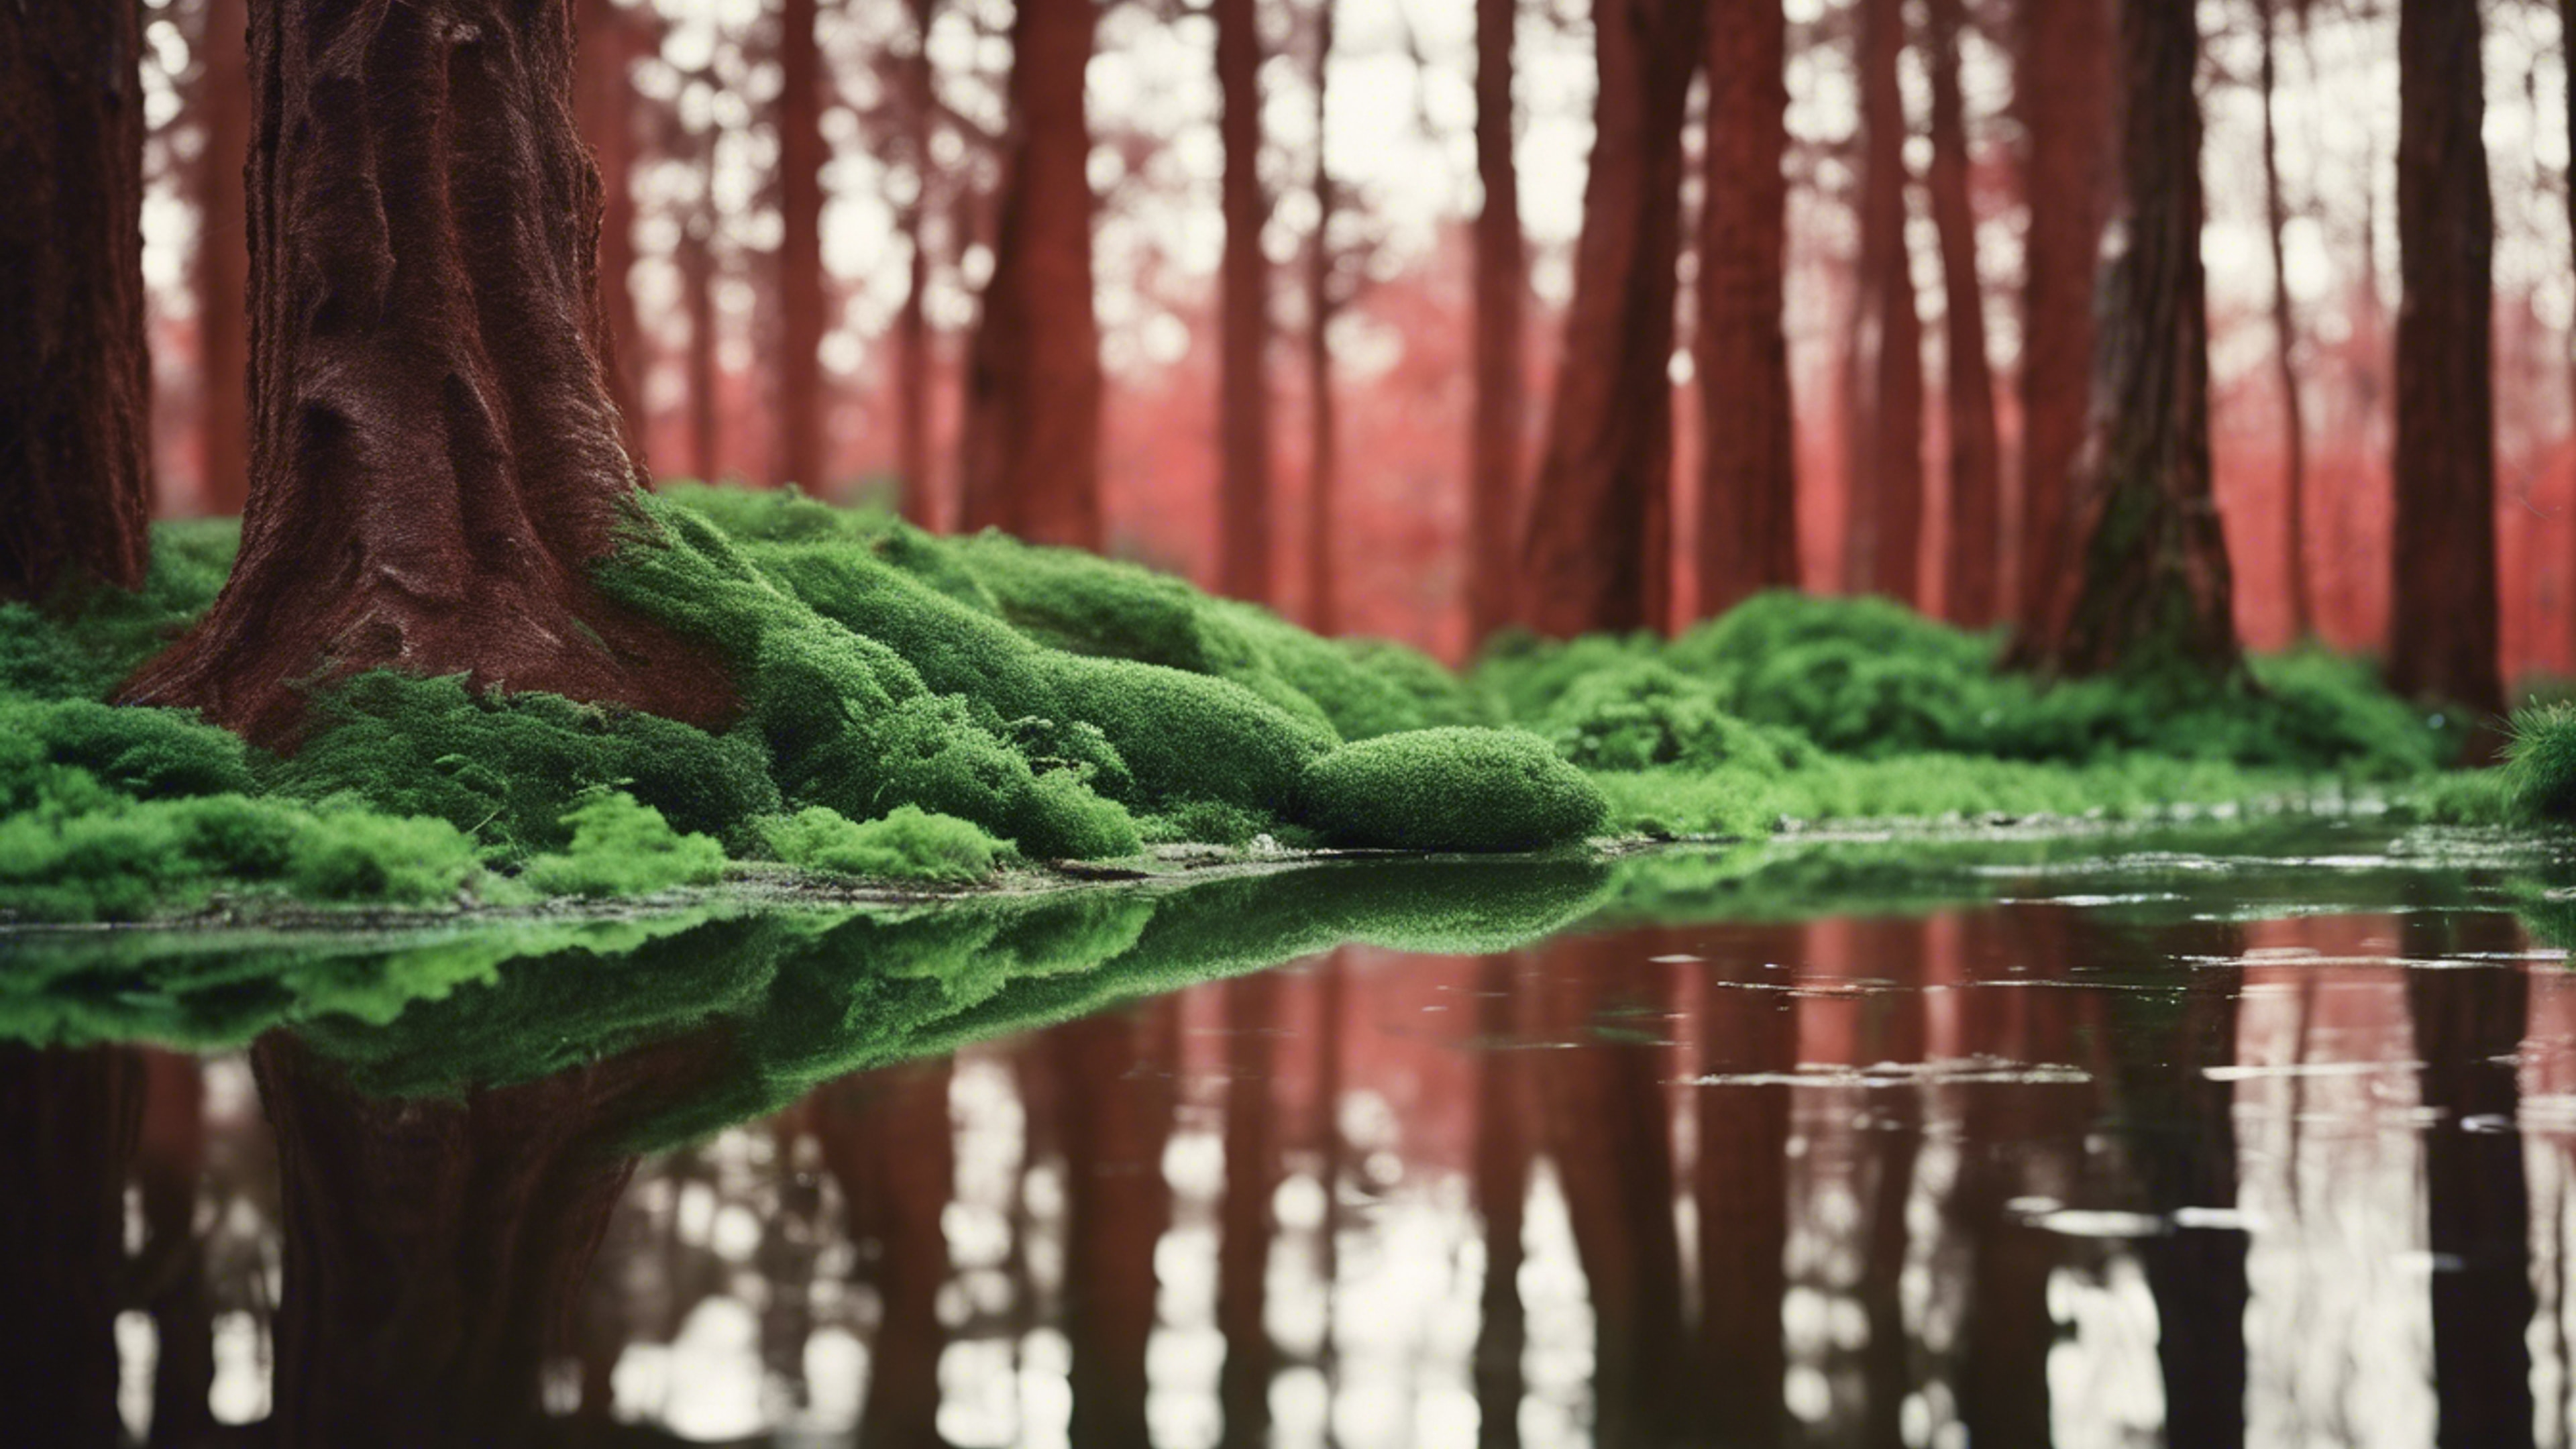 Lush, green forest reflections on a shiny, red leather surface.壁紙[6f4e1618f75b40719461]